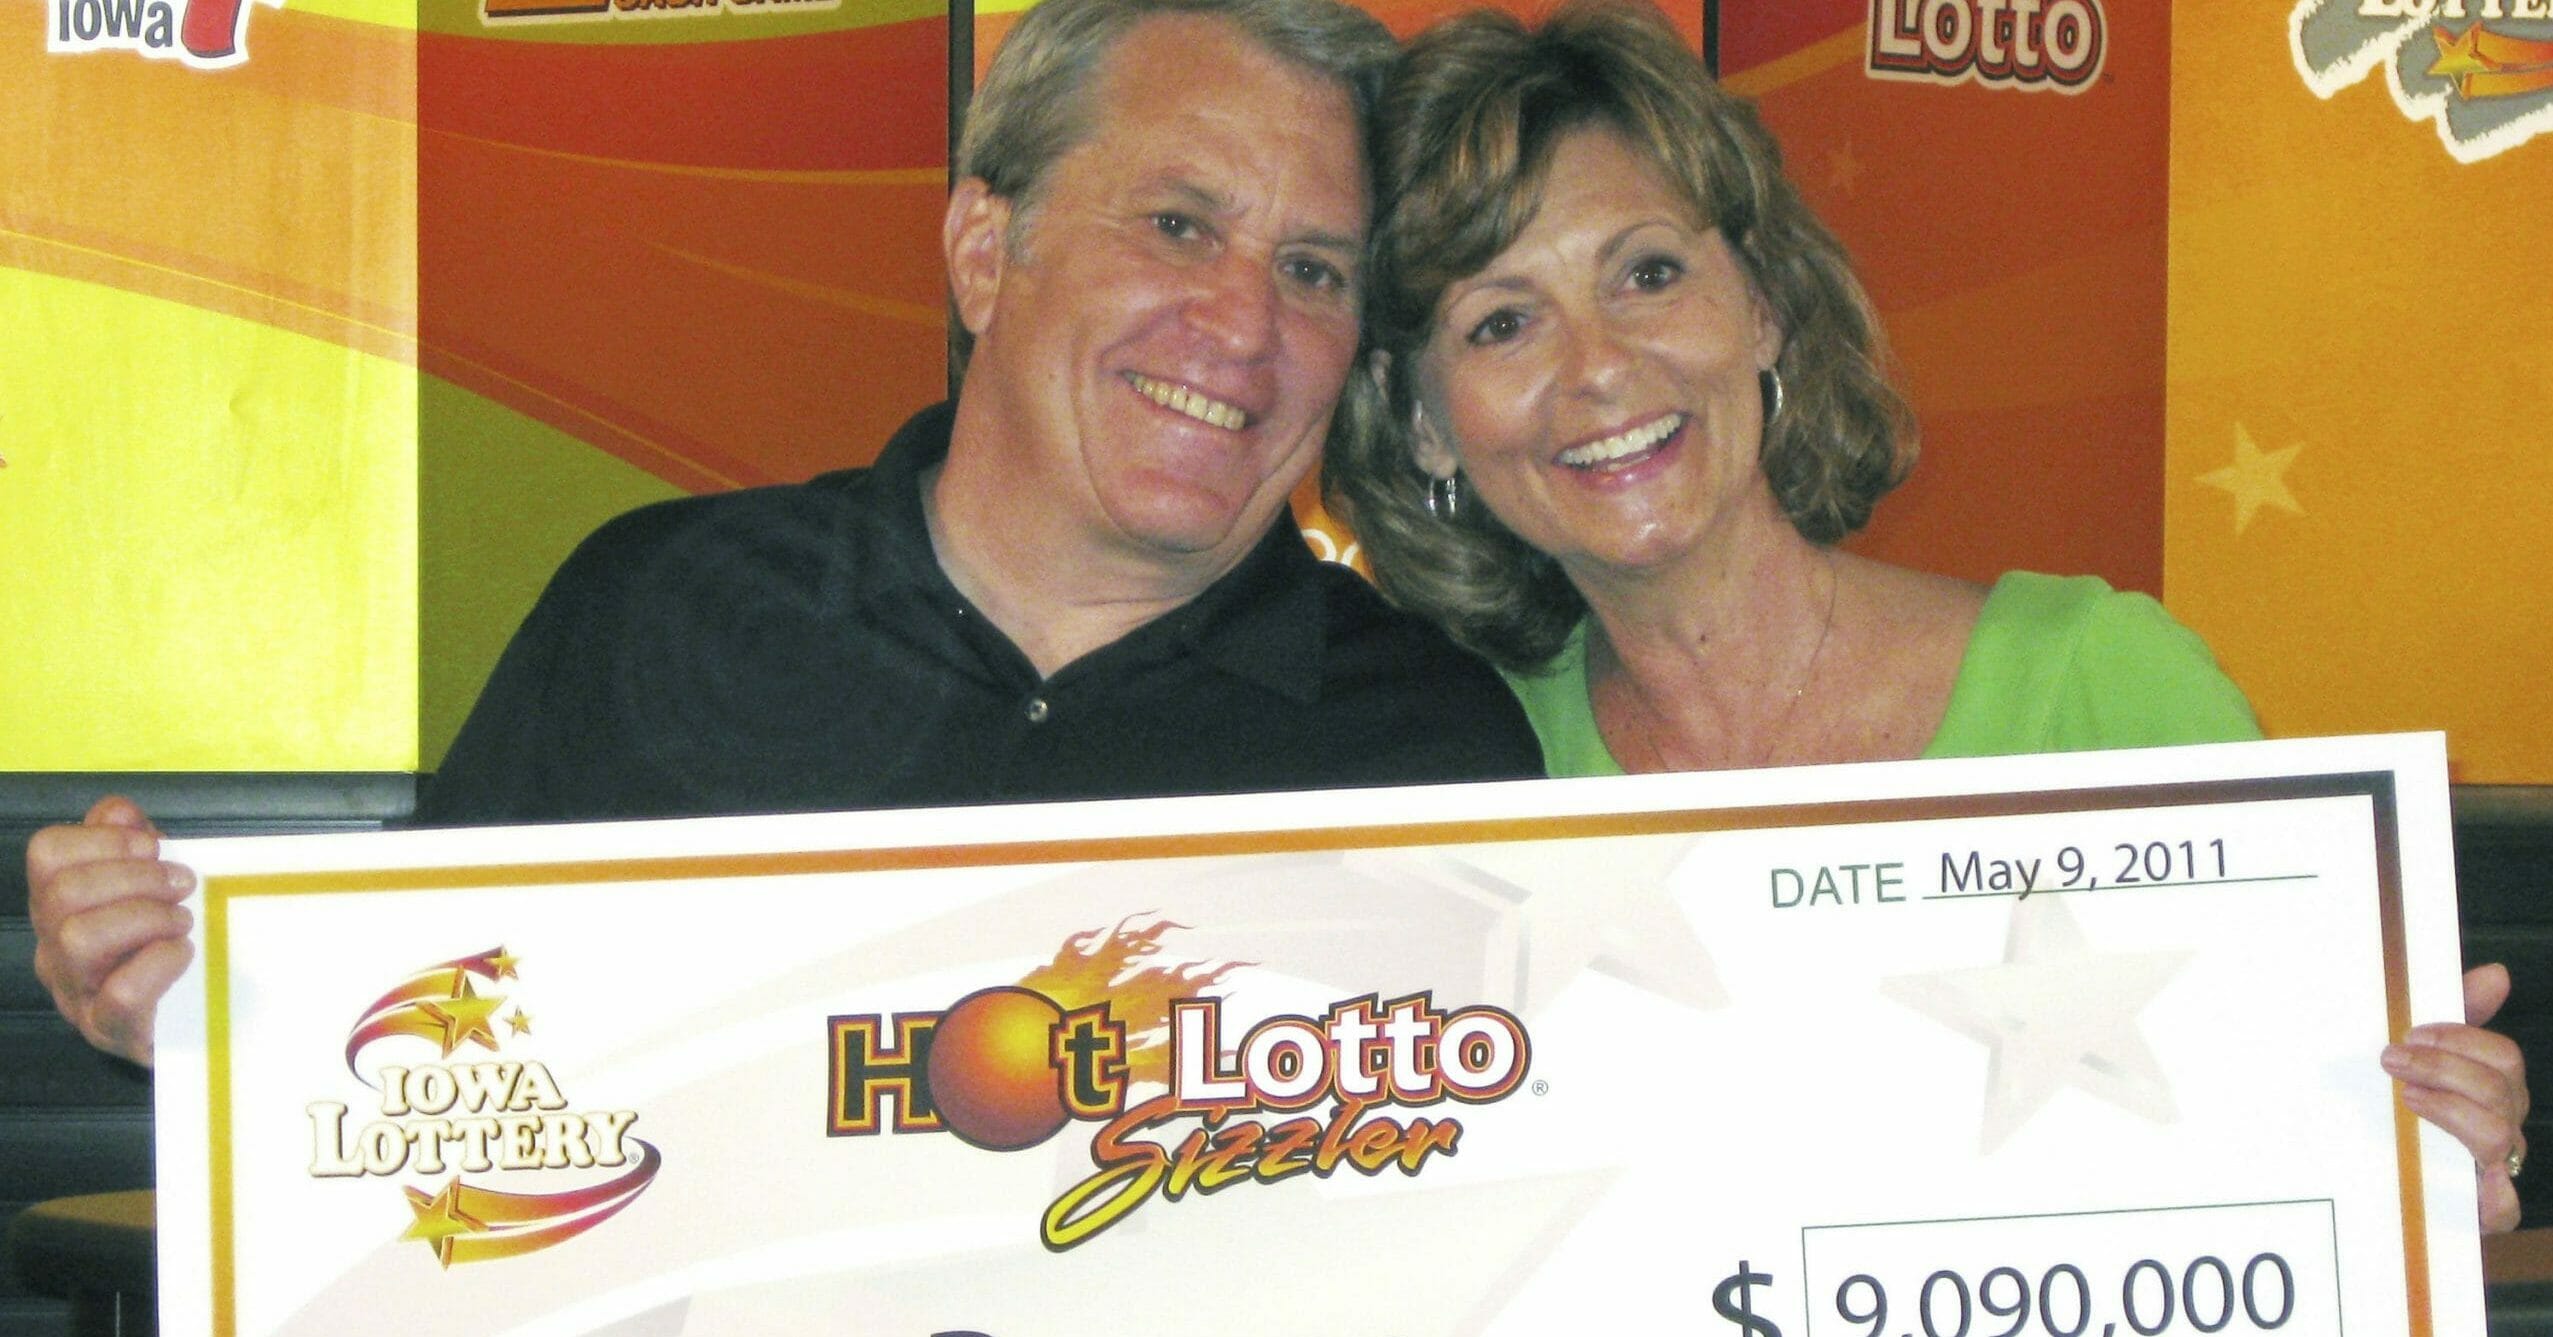 This May 9, 2011, photo shows Larry Dawson and his wife, Kathy, claiming their $9.09 million Hot Lotto jackpot in Des Moines, Iowa.